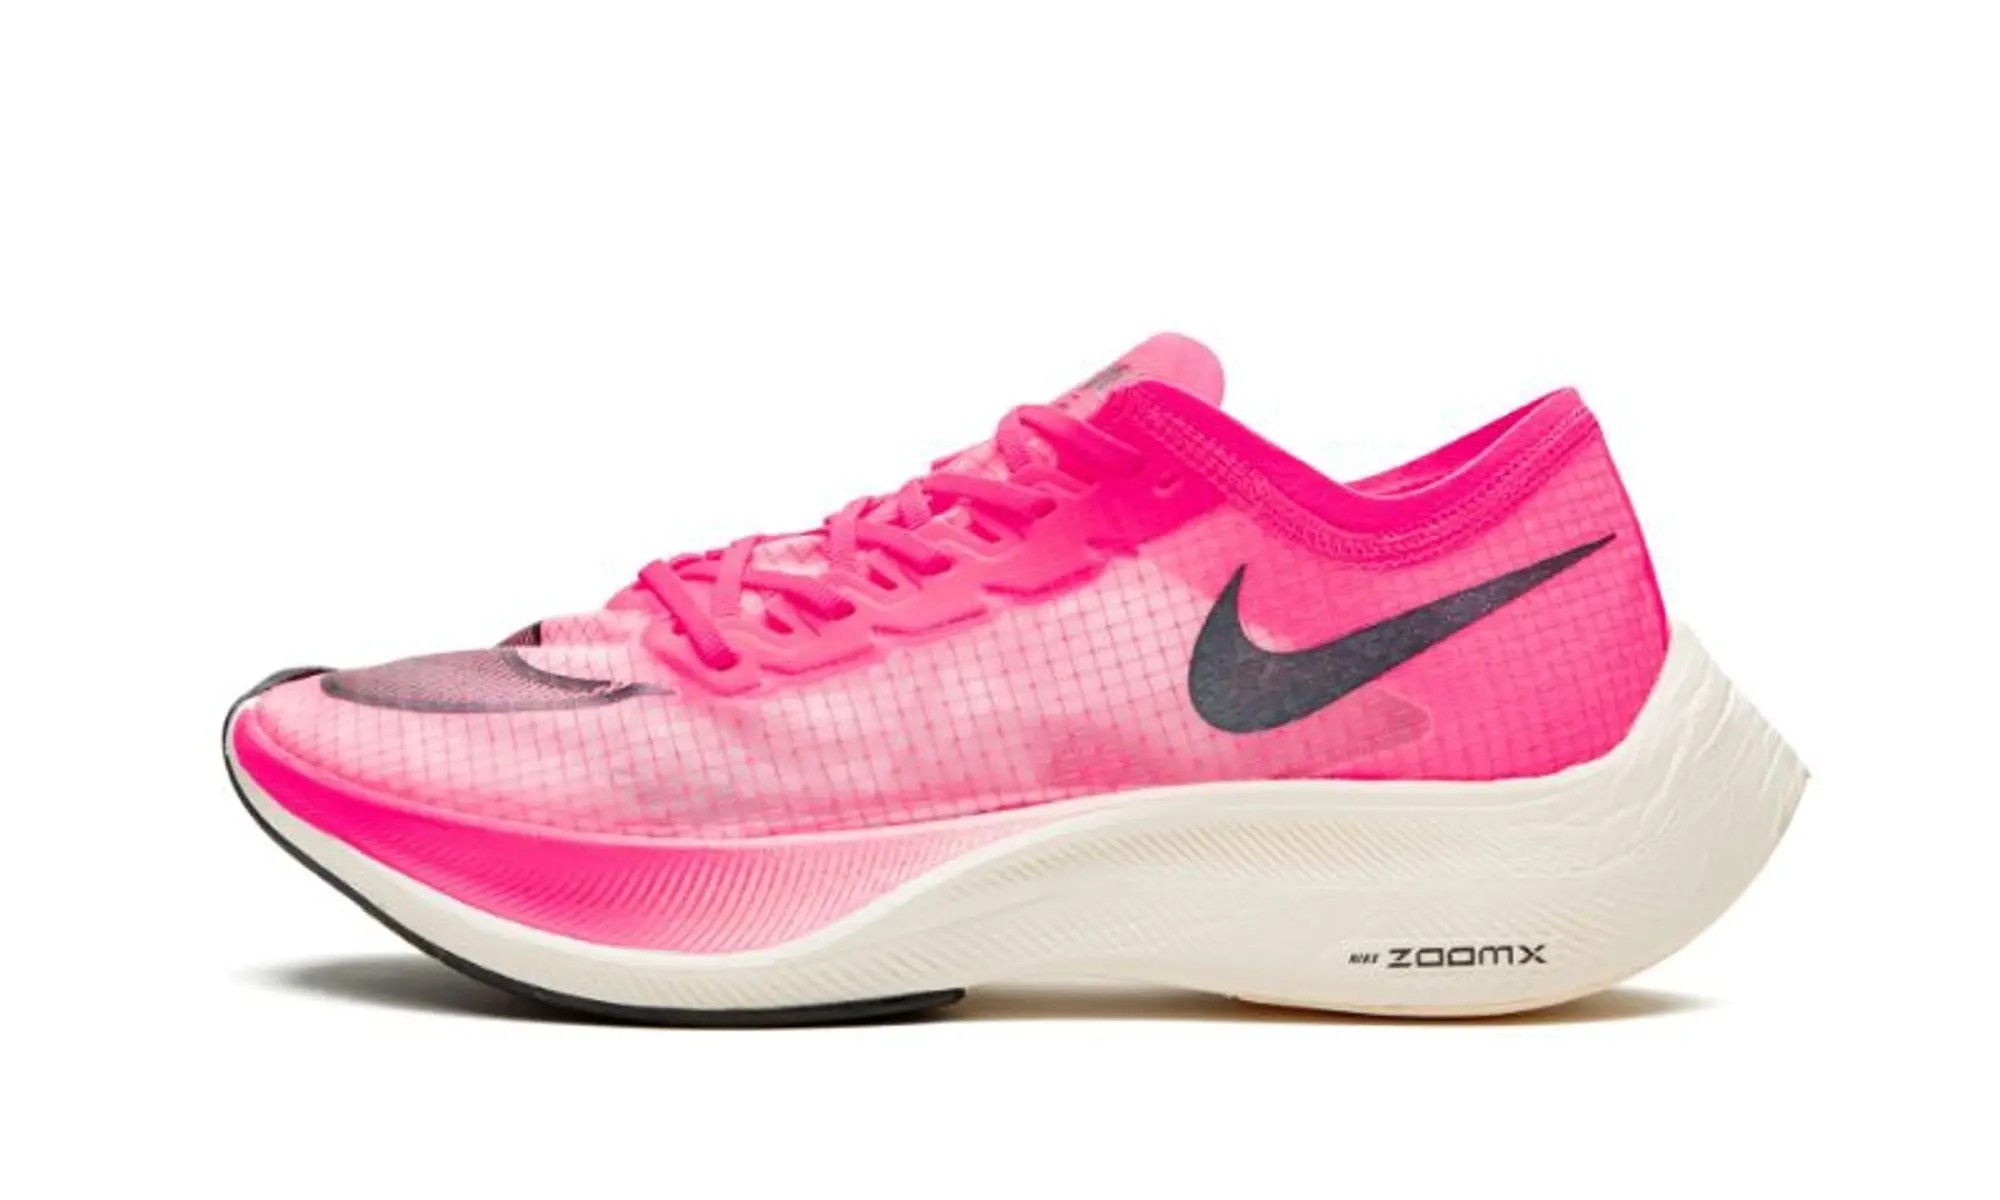 Nike Zoomx Vaporfly Next% Shoes